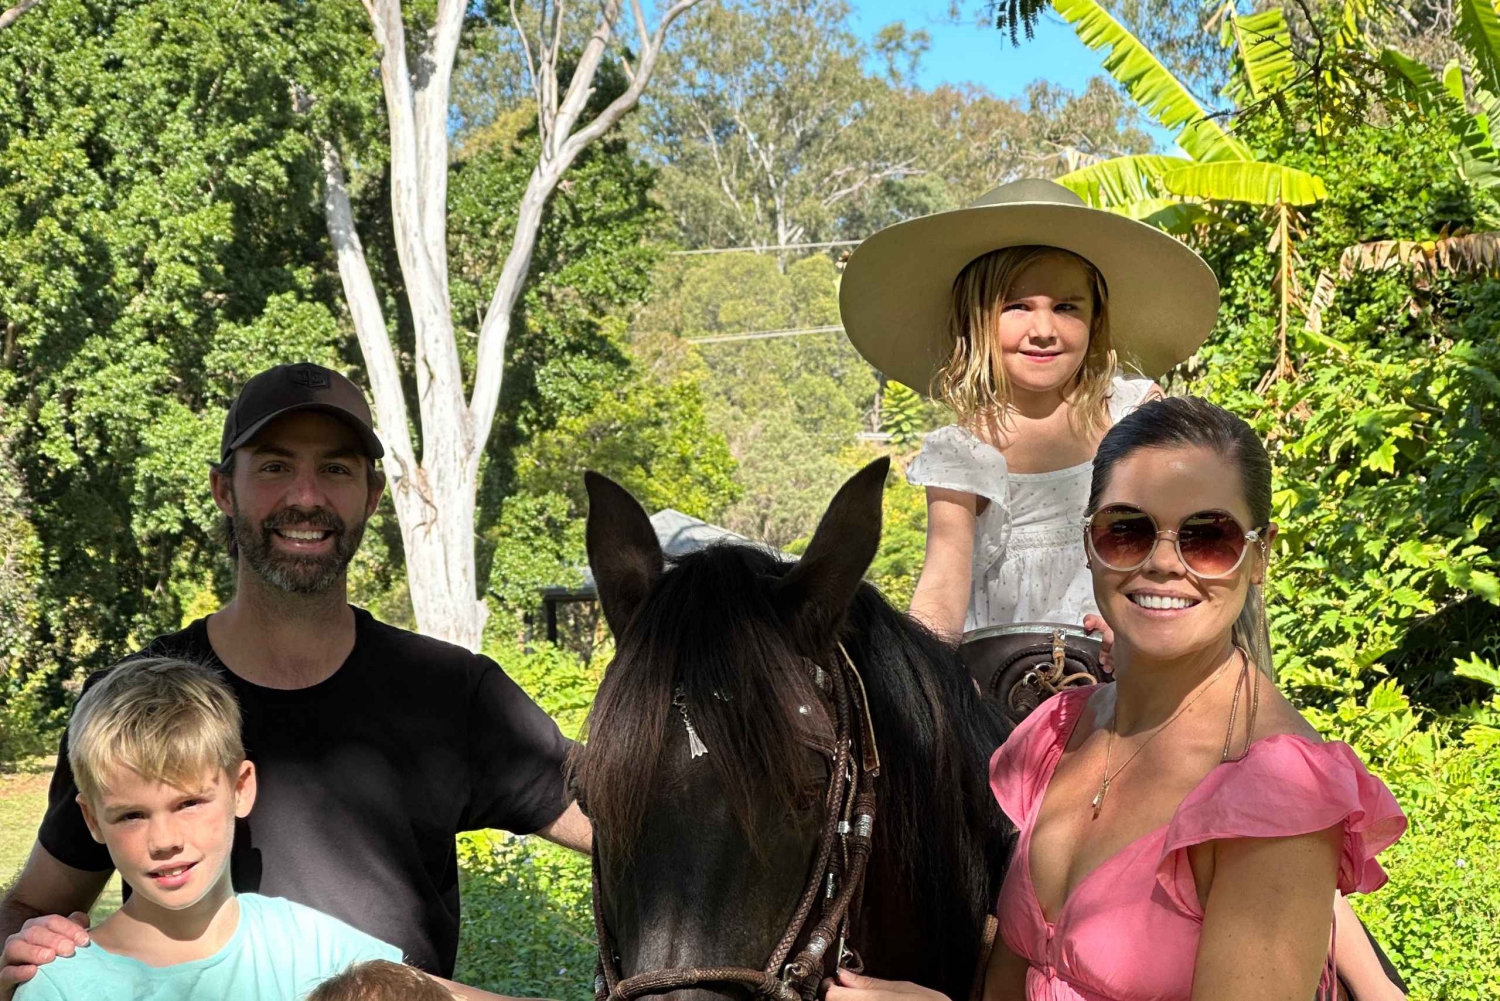 Family Fun with Peruvian Paso Horses: Ride, Feed, and Bond